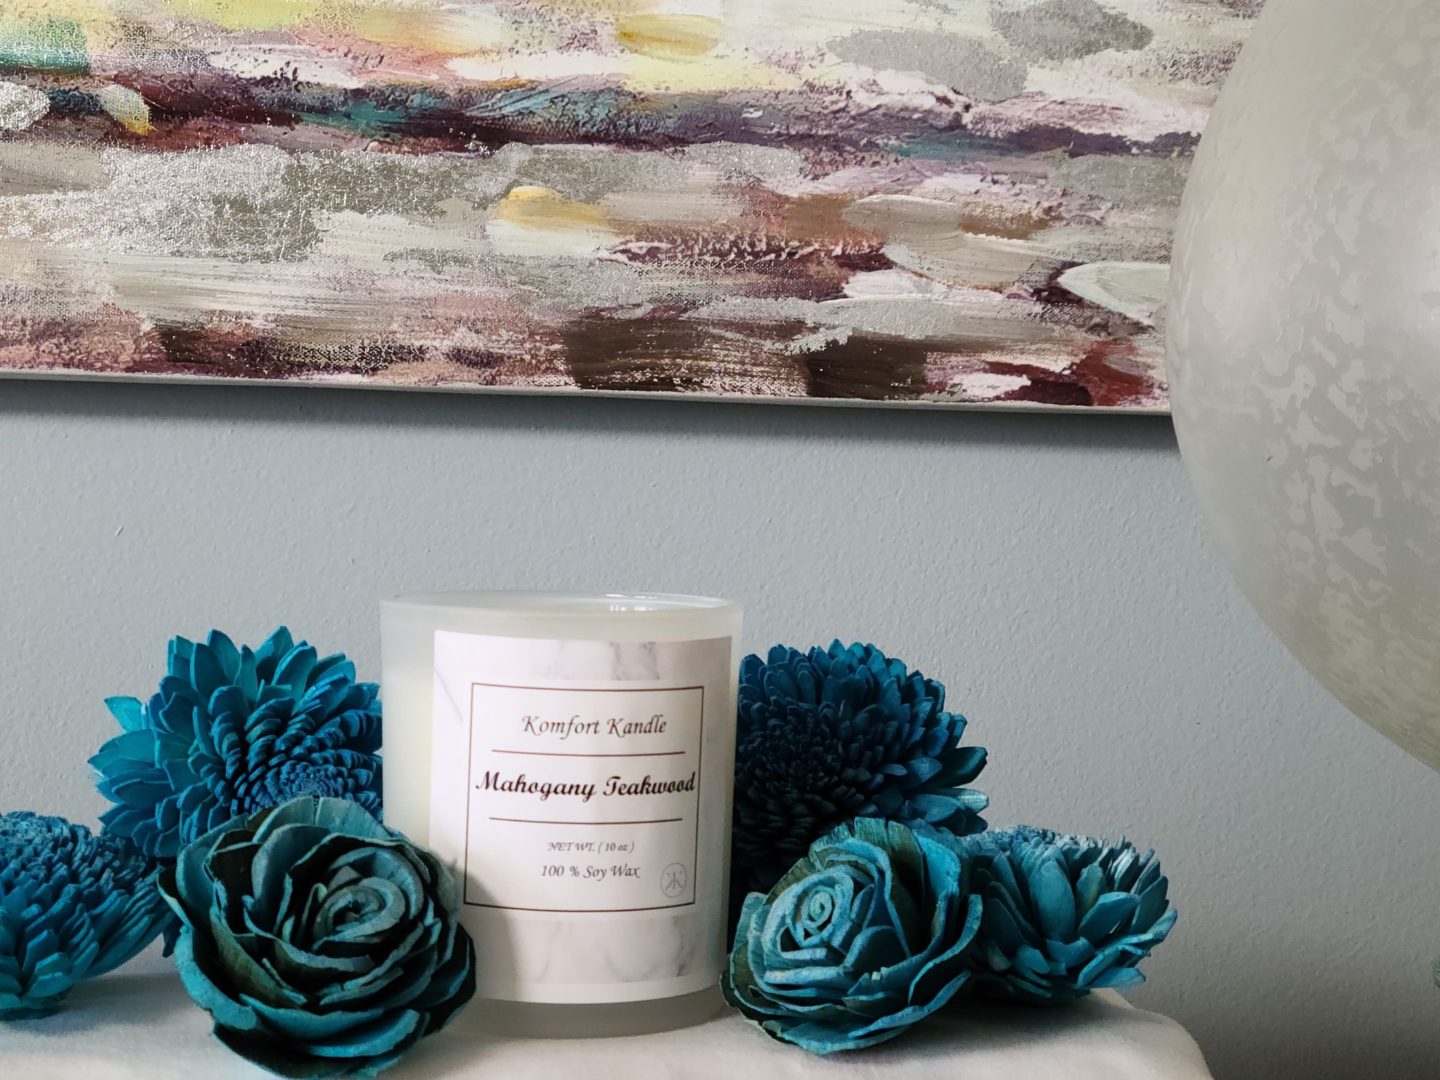 Celebrate National Self-Care Day With Black-Owned Luxury Comfort & Candle Boutique Komfort Kollection